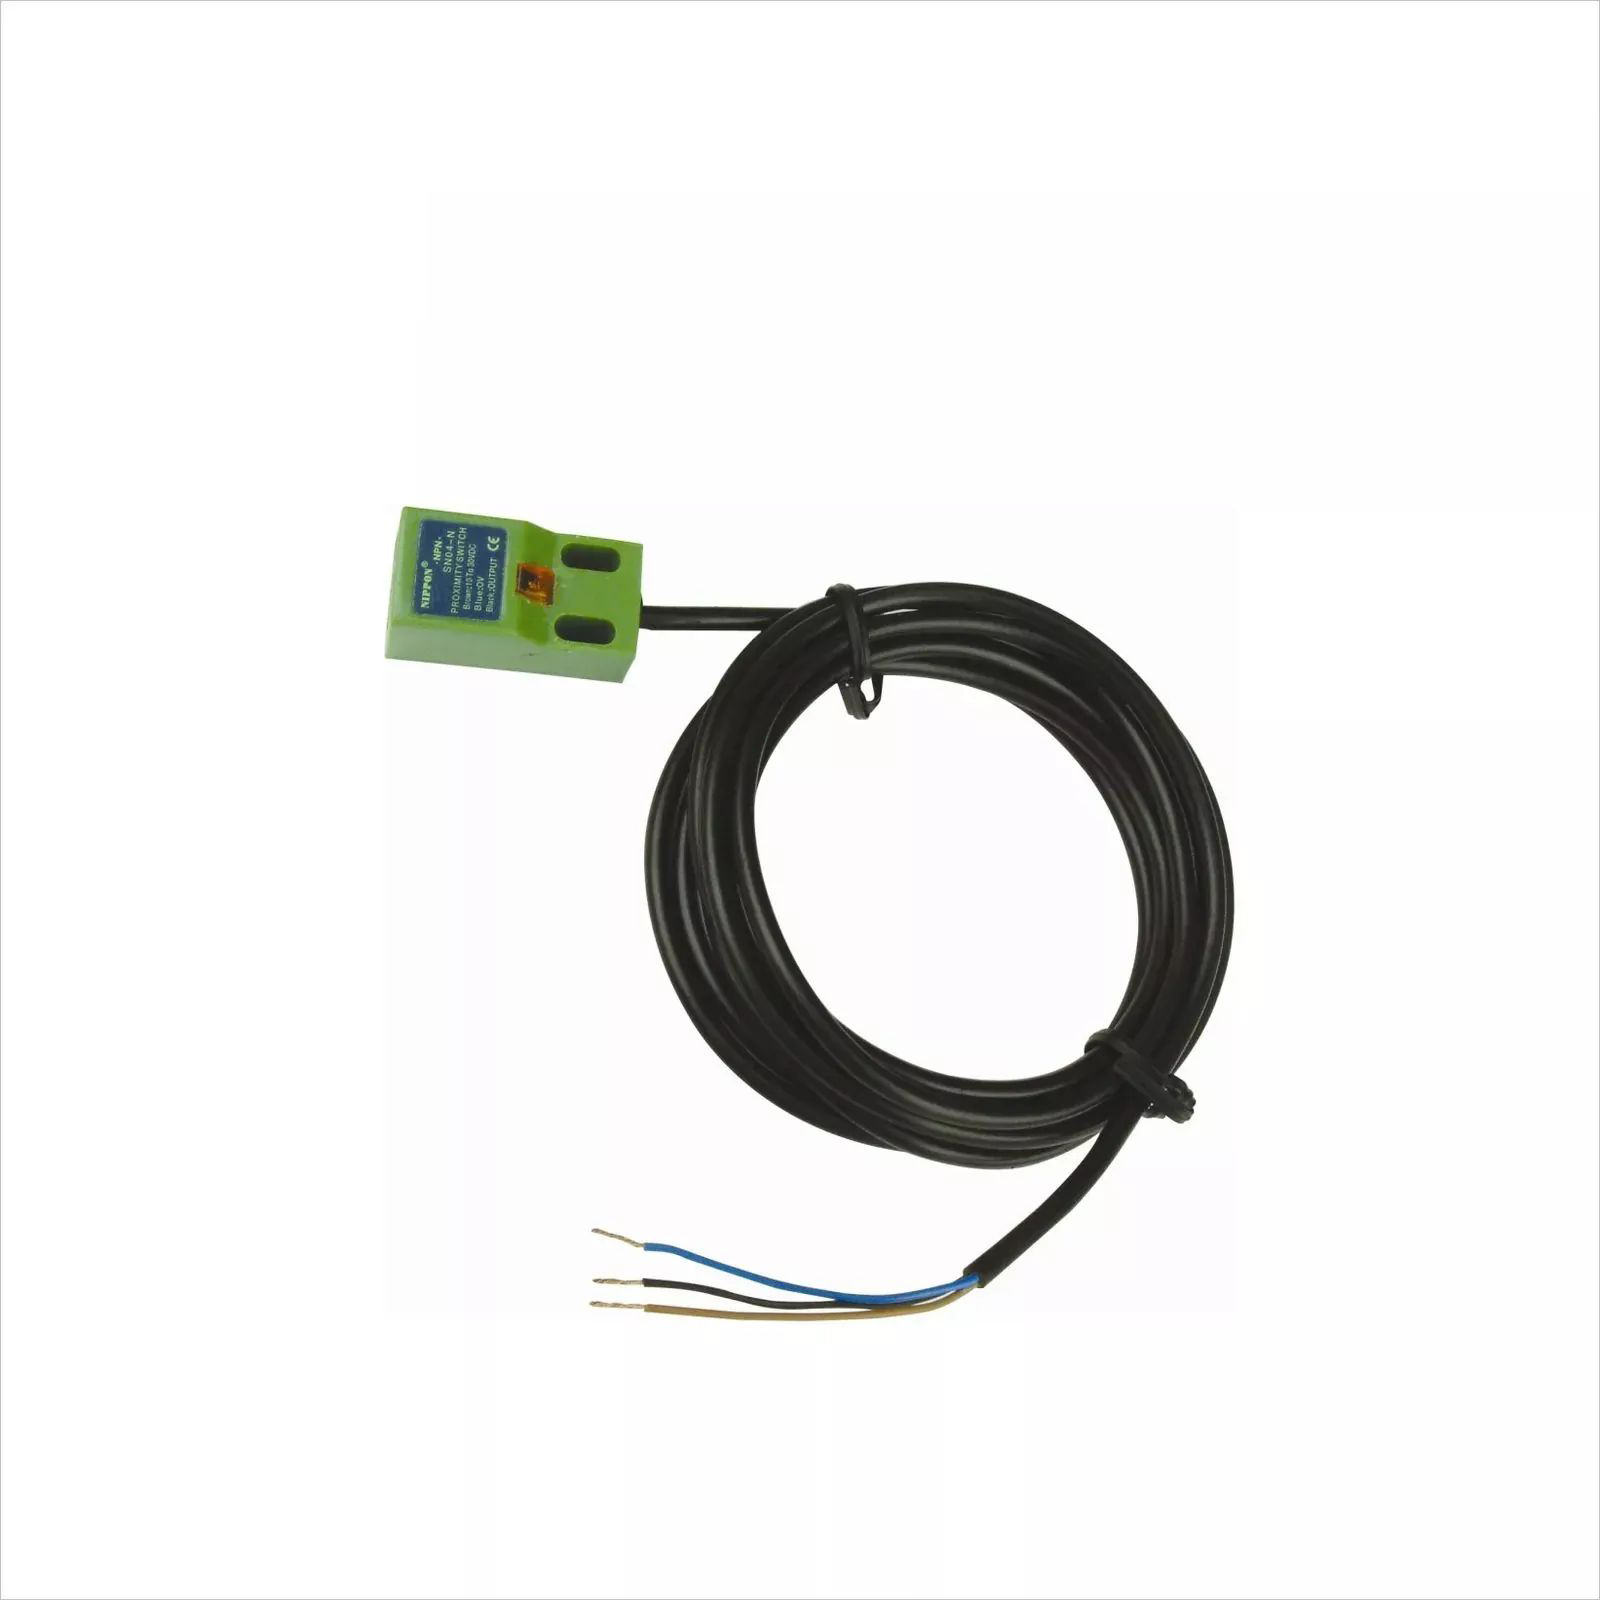 SNO4 Customizable industrial universal proximity switch for digital display counters